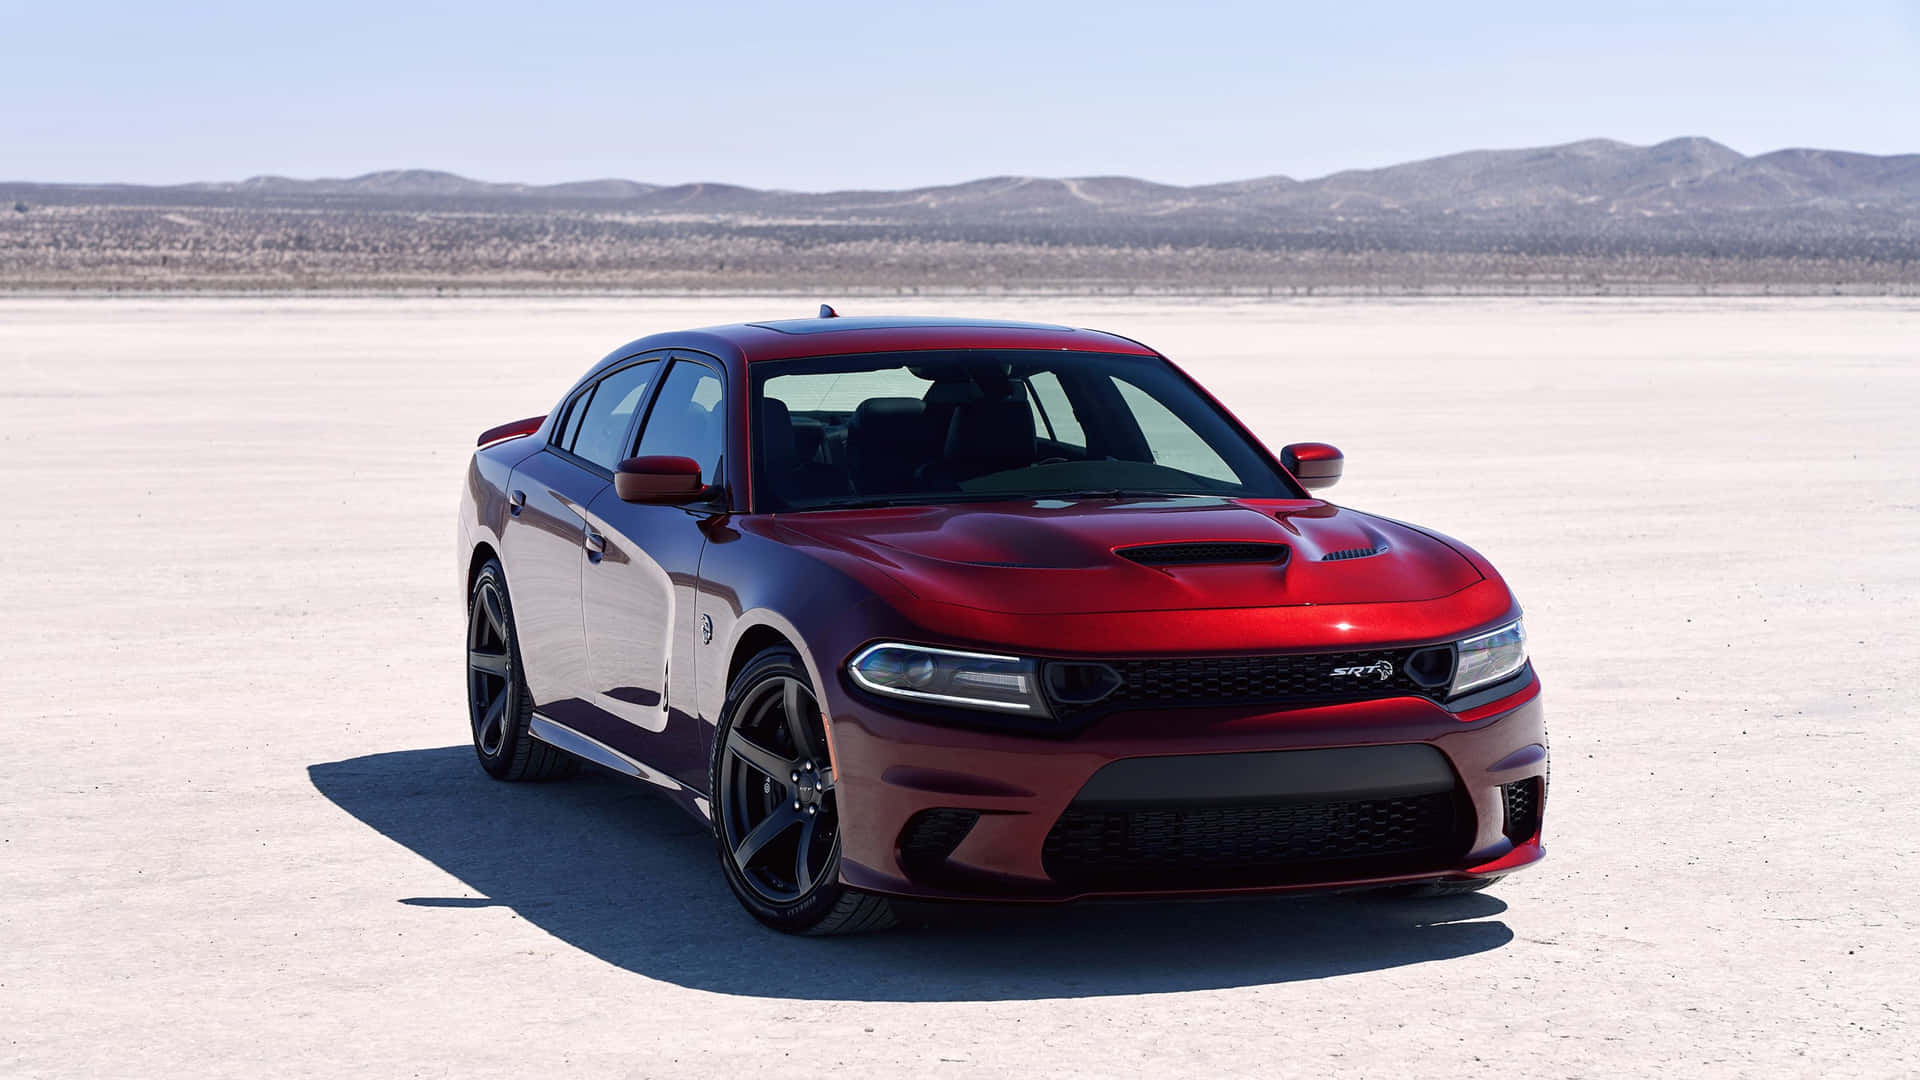 The Red Dodge Charger Srt Is Parked In The Desert Wallpaper